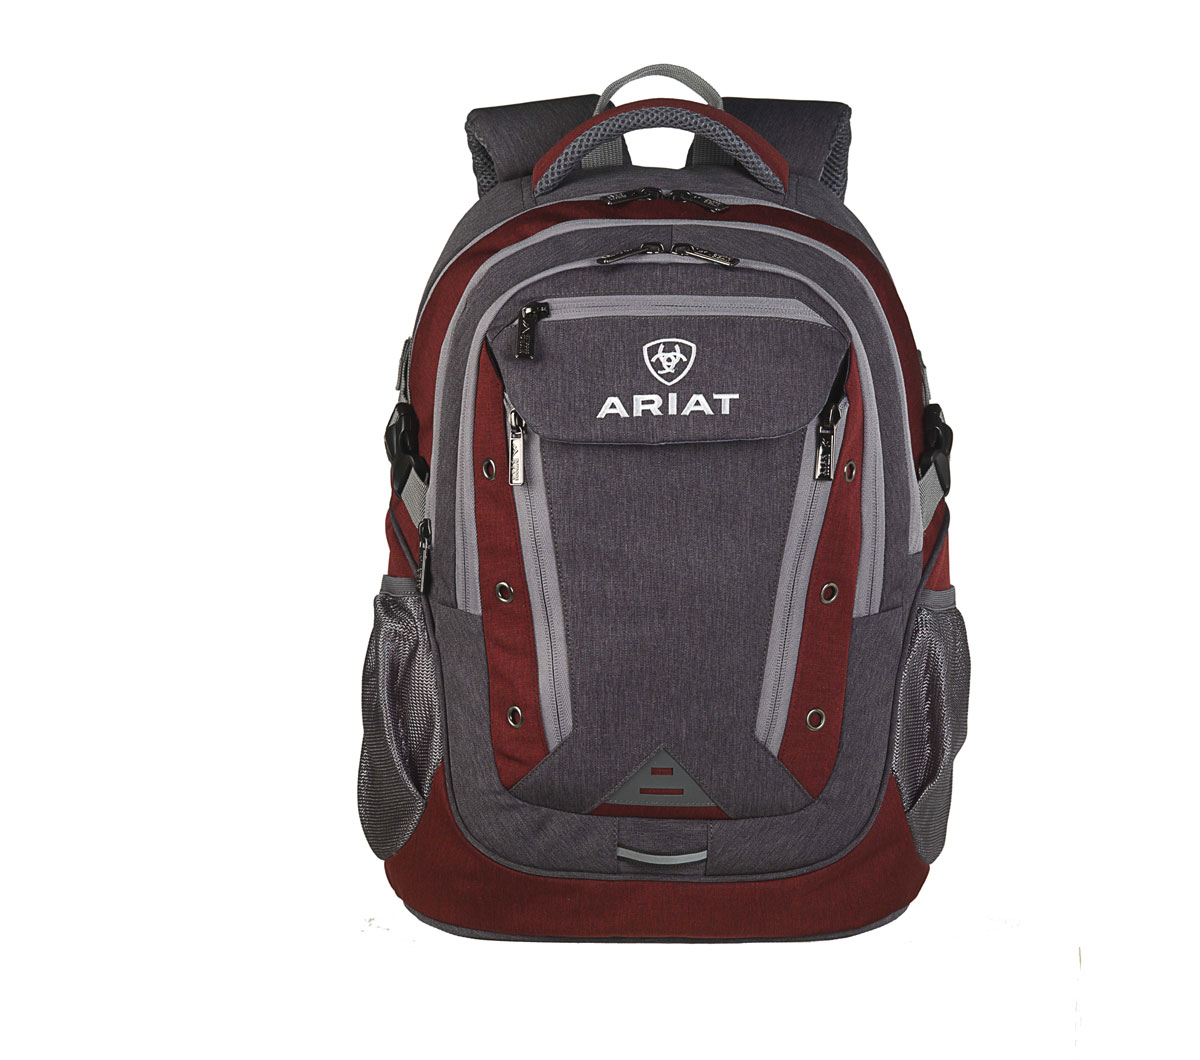 A460000706 Ariat Bungee Pgry Brgndy Accent Backpack, Gray